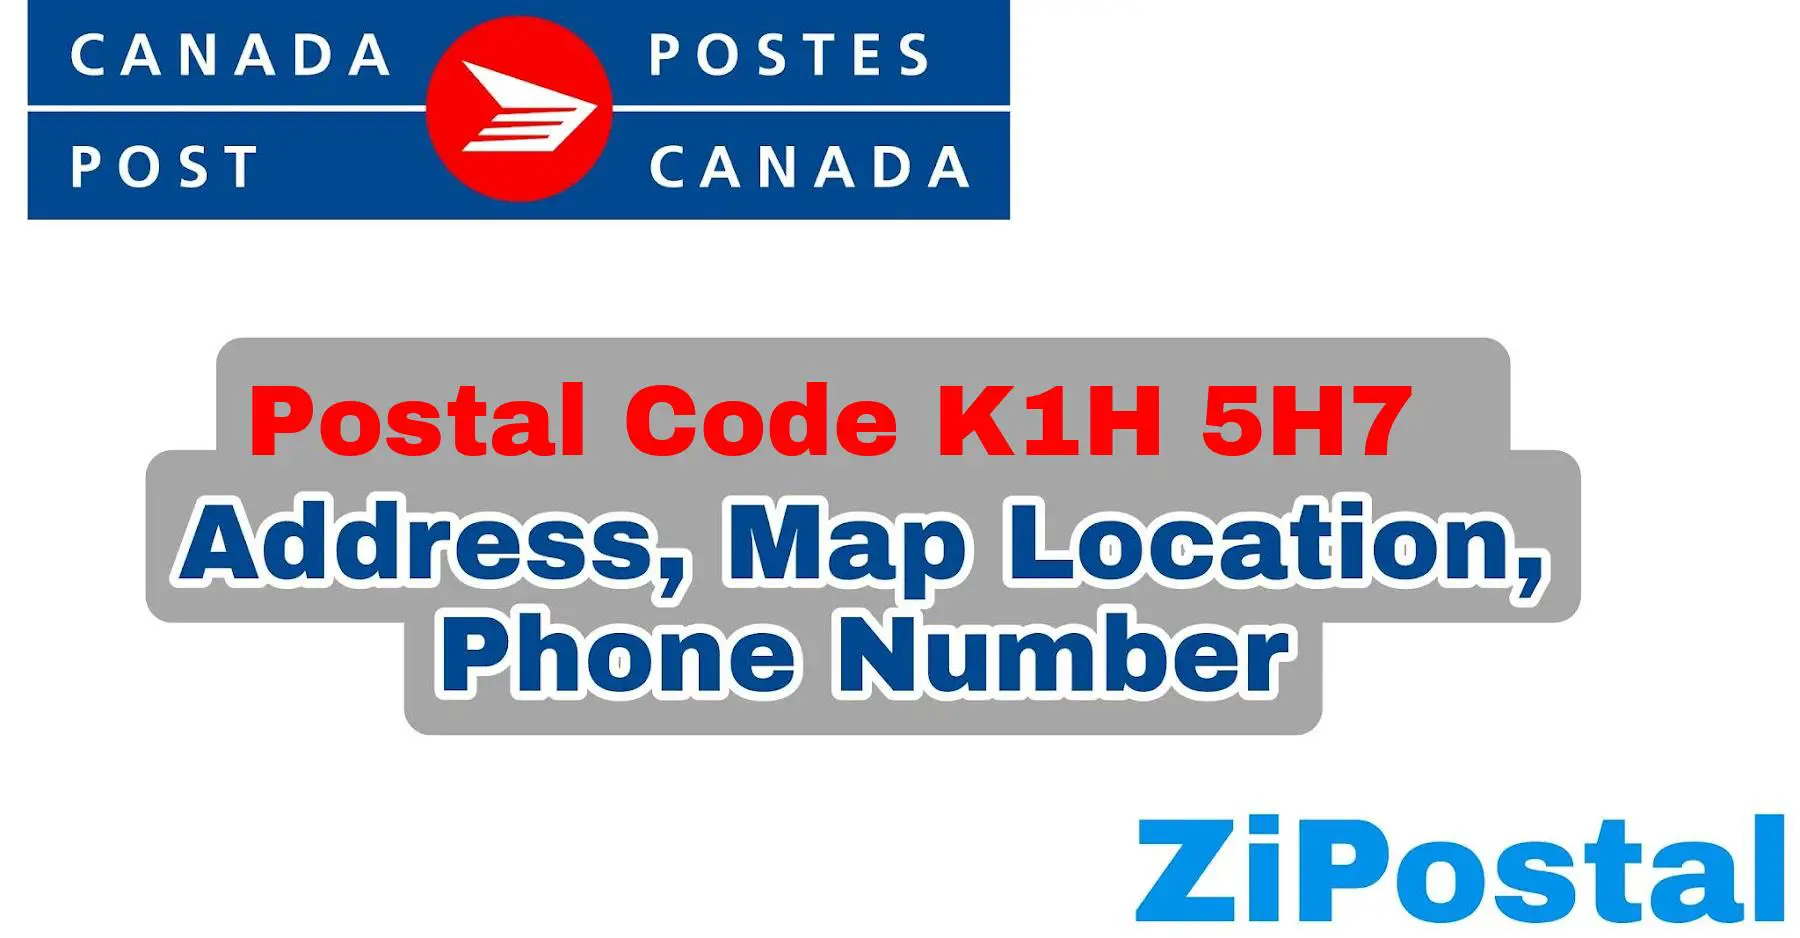 Postal Code K1H 5H7 Address Map Location and Phone Number